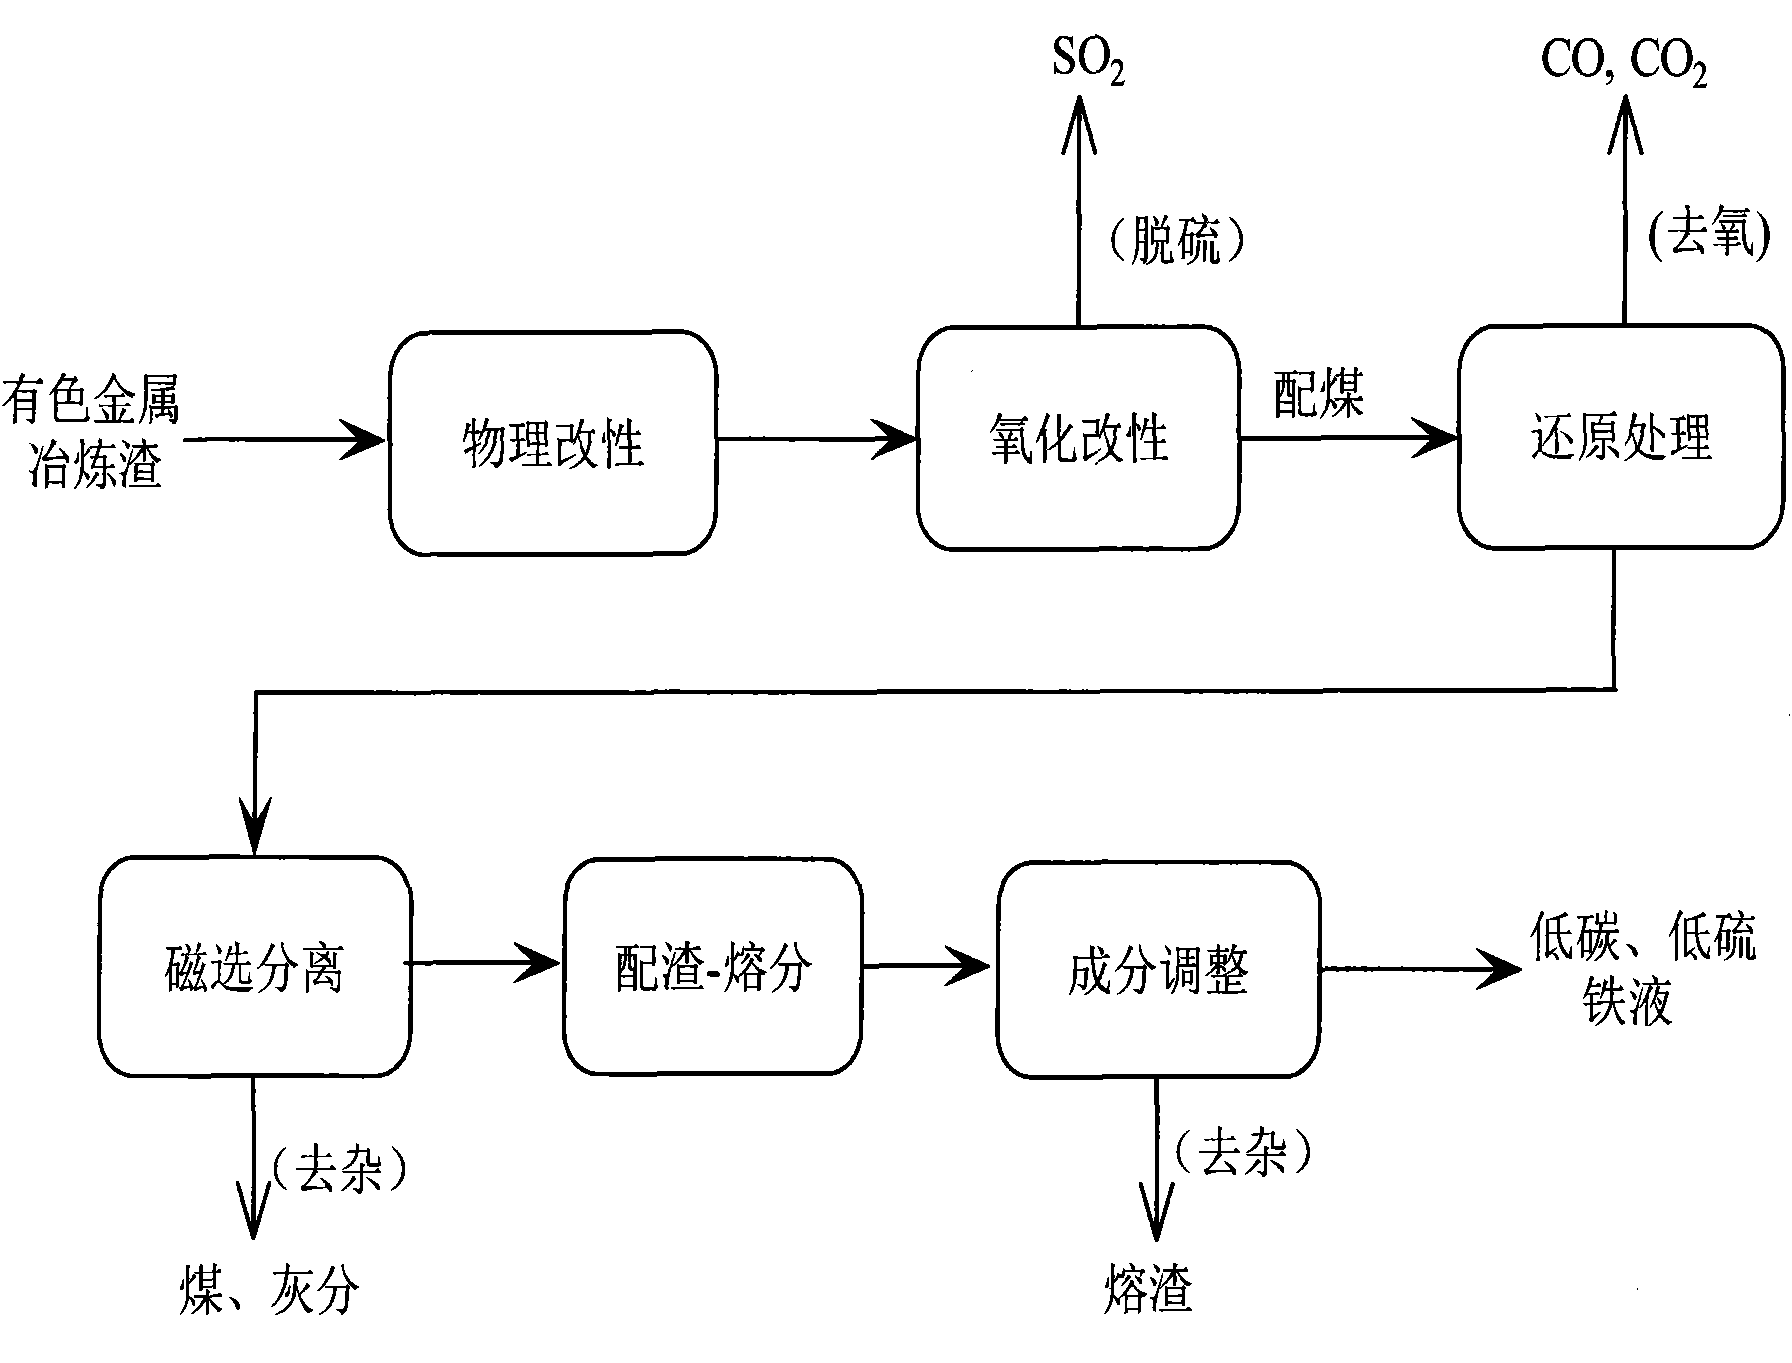 Method for extracting valuable elements from slag of melted high-iron high-silicon nonferrous metal